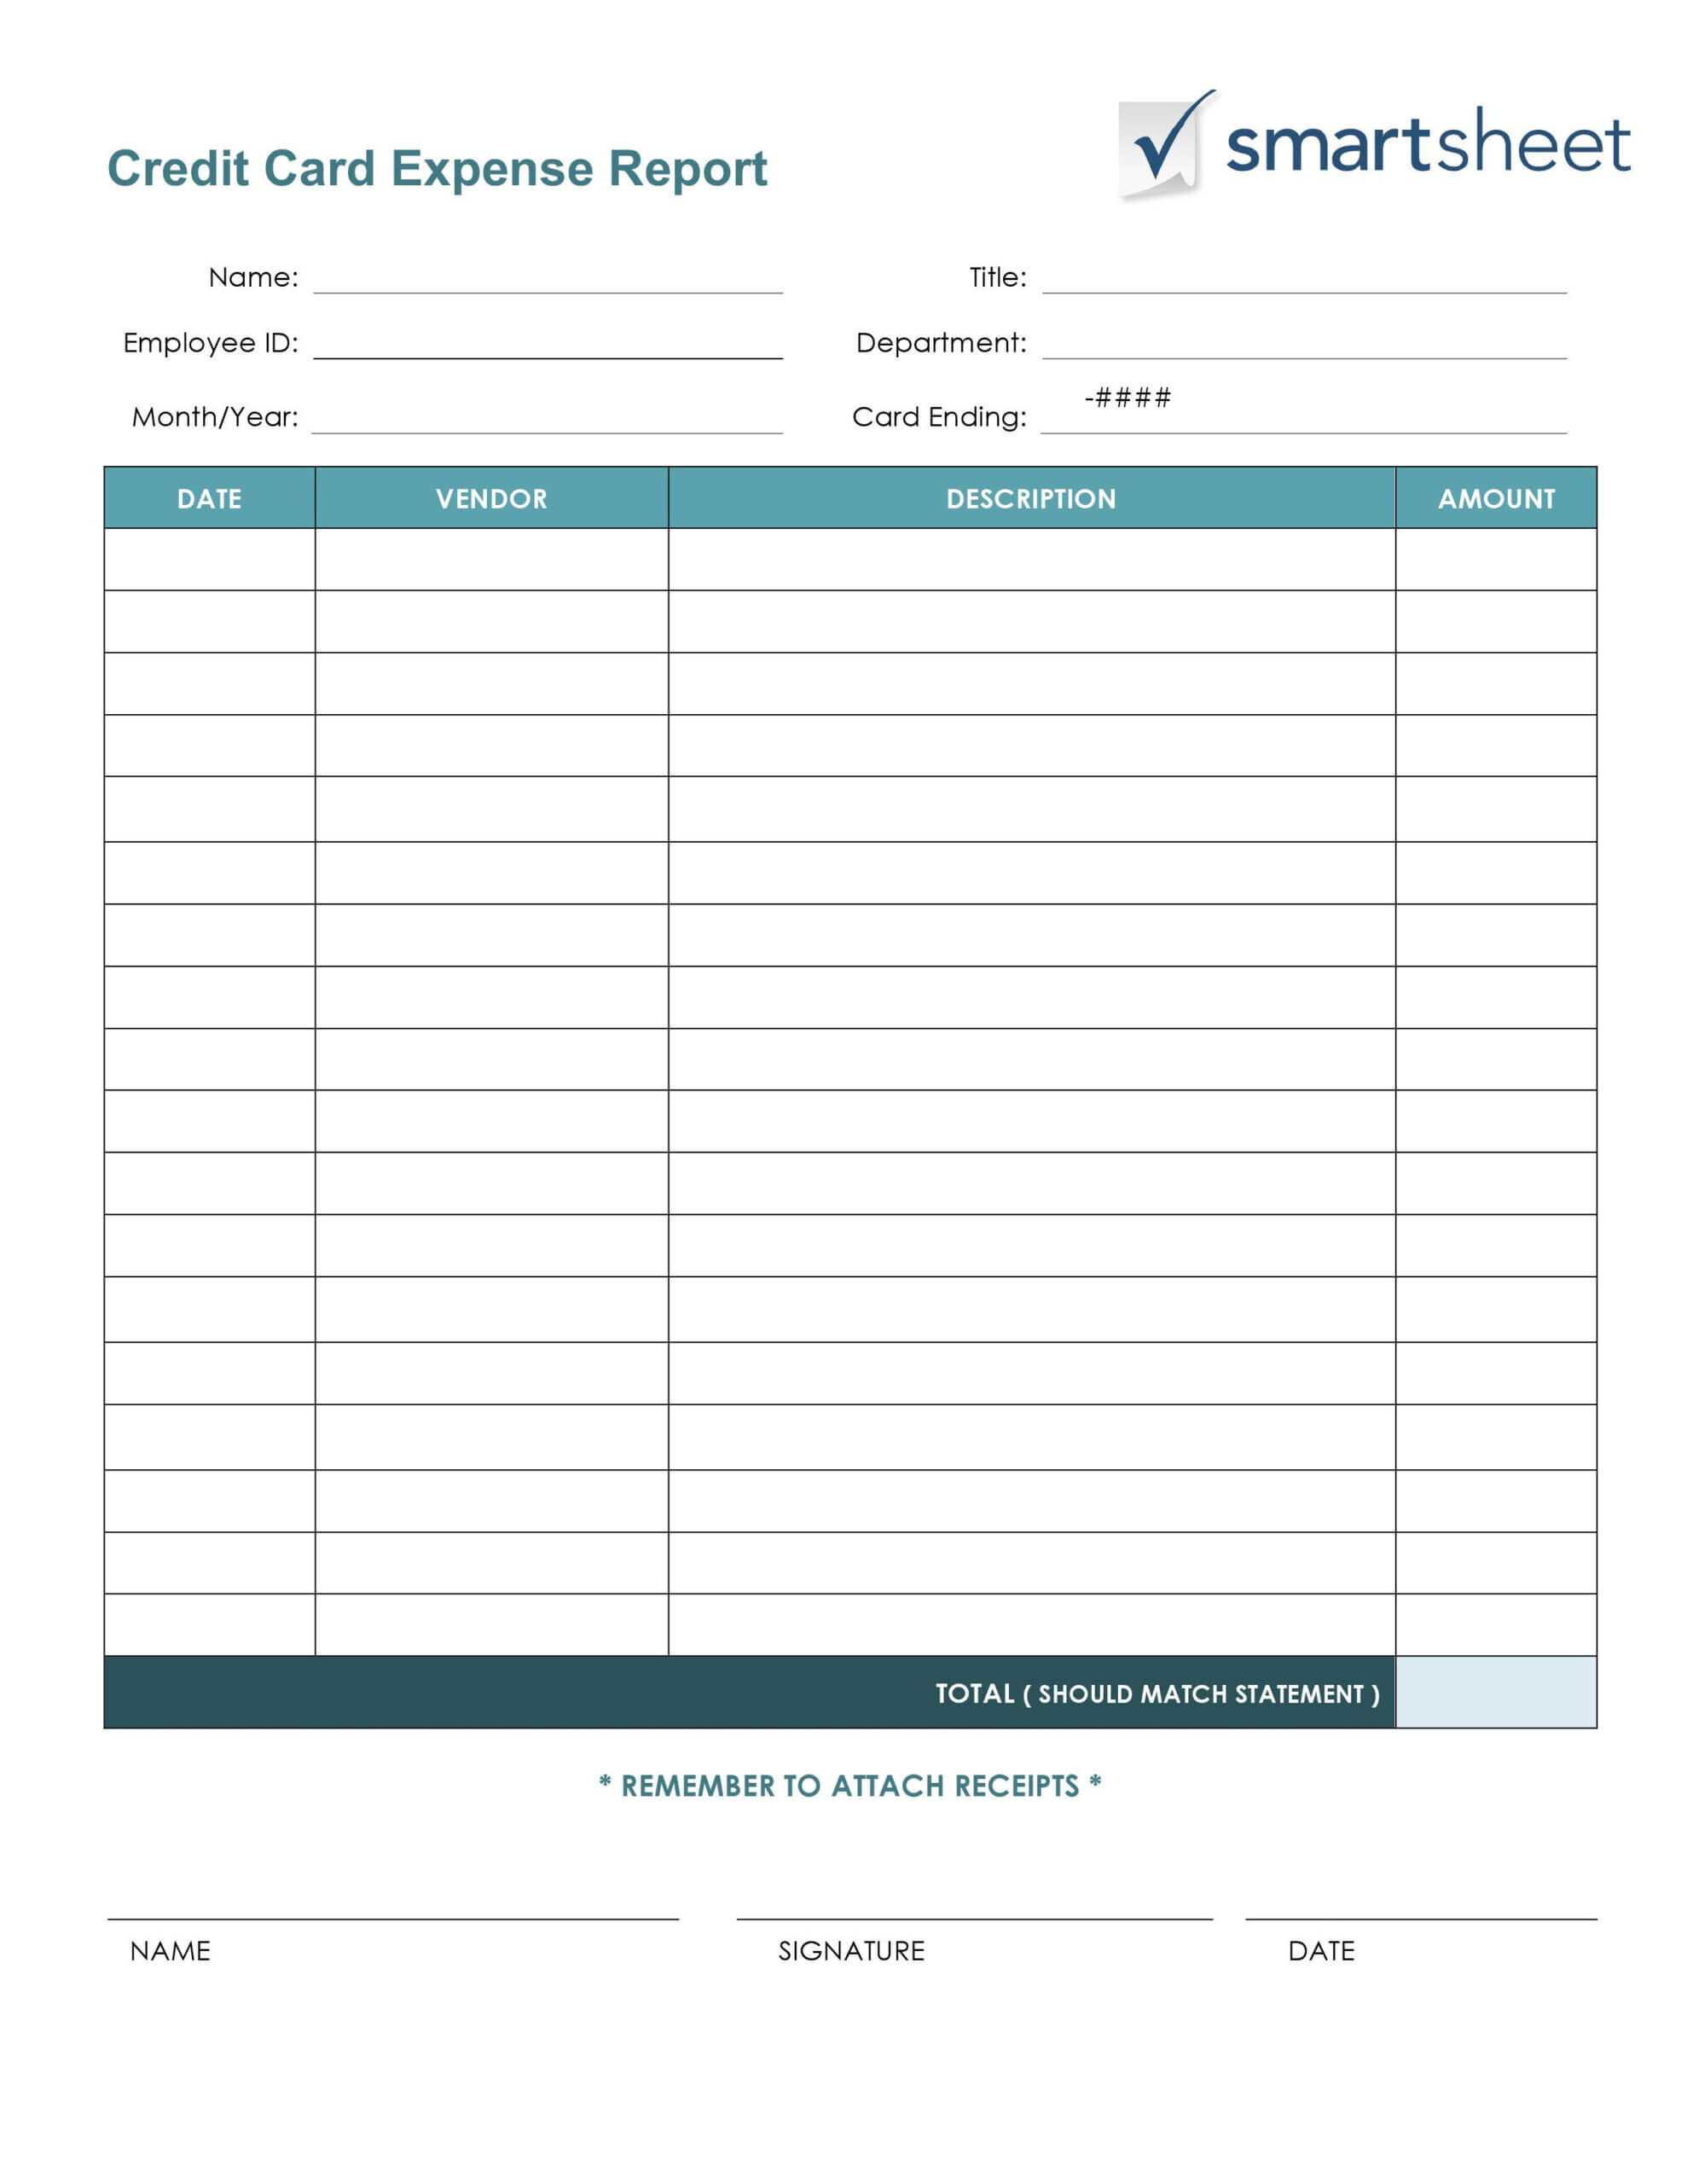 Employee Expense Report Template | 11+ Free Docs, Xlsx & Pdf Throughout Credit Card Statement Template Excel